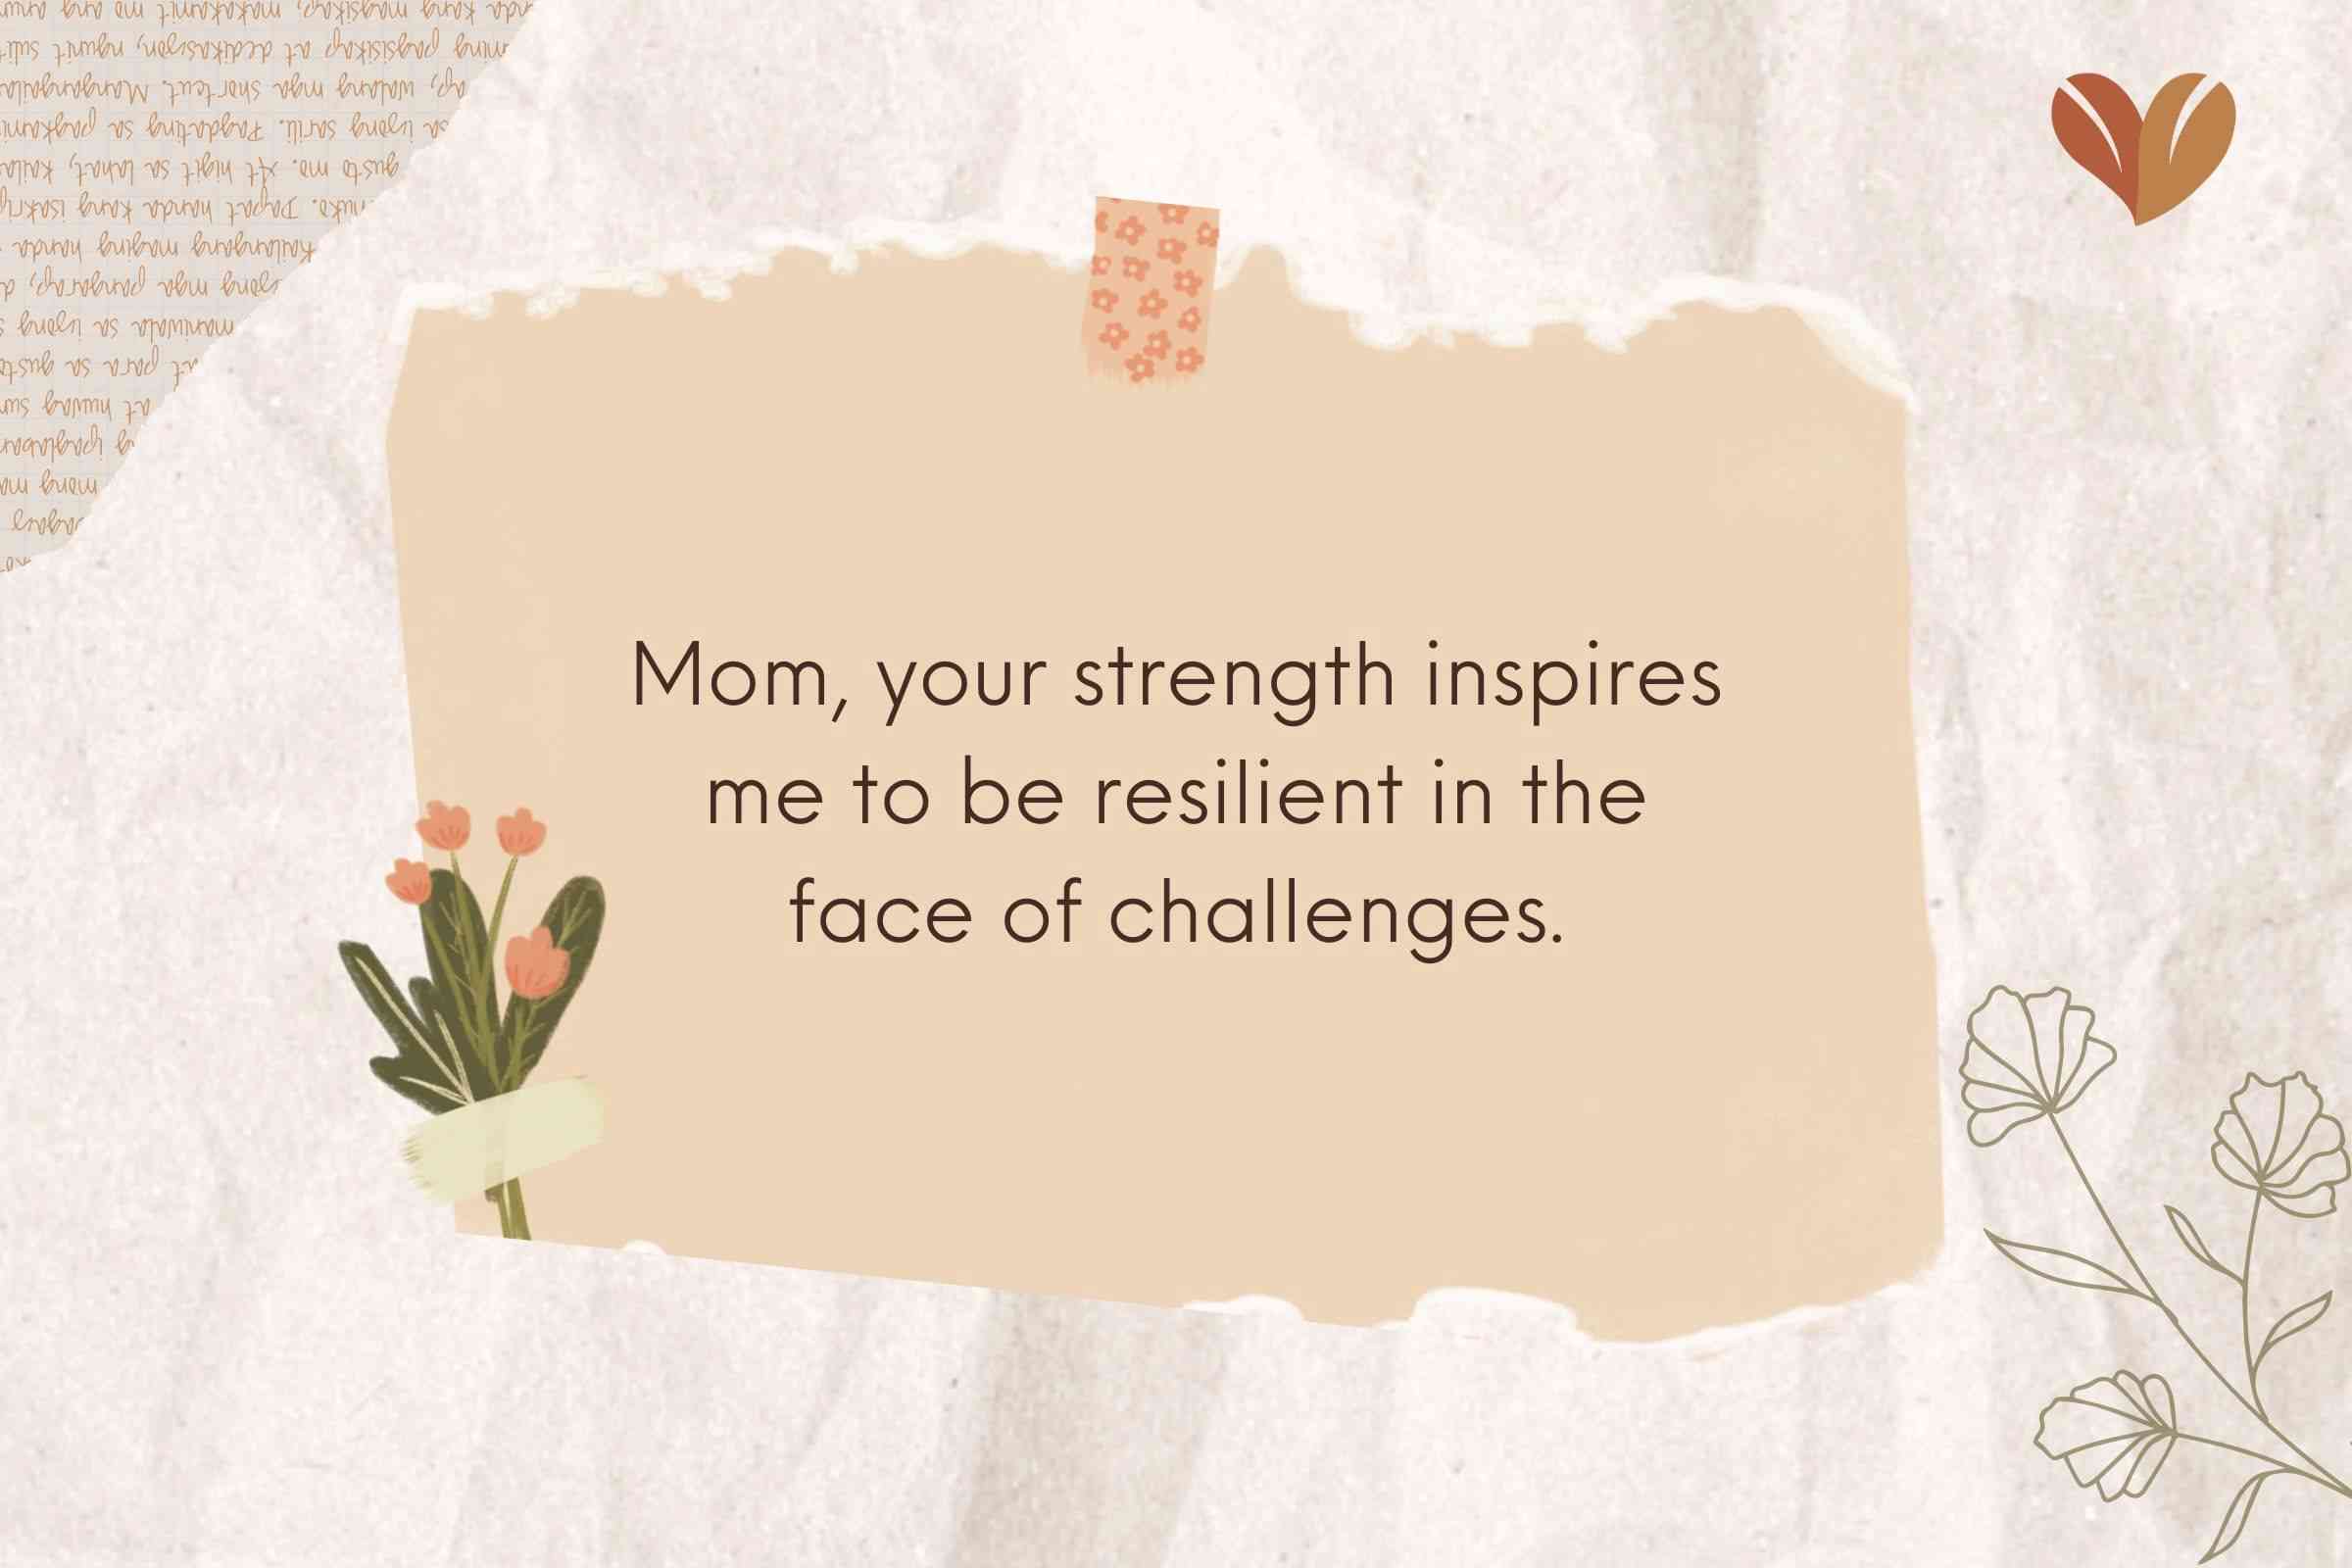 Mom, your strength inspires me to be resilient in the face of challenges